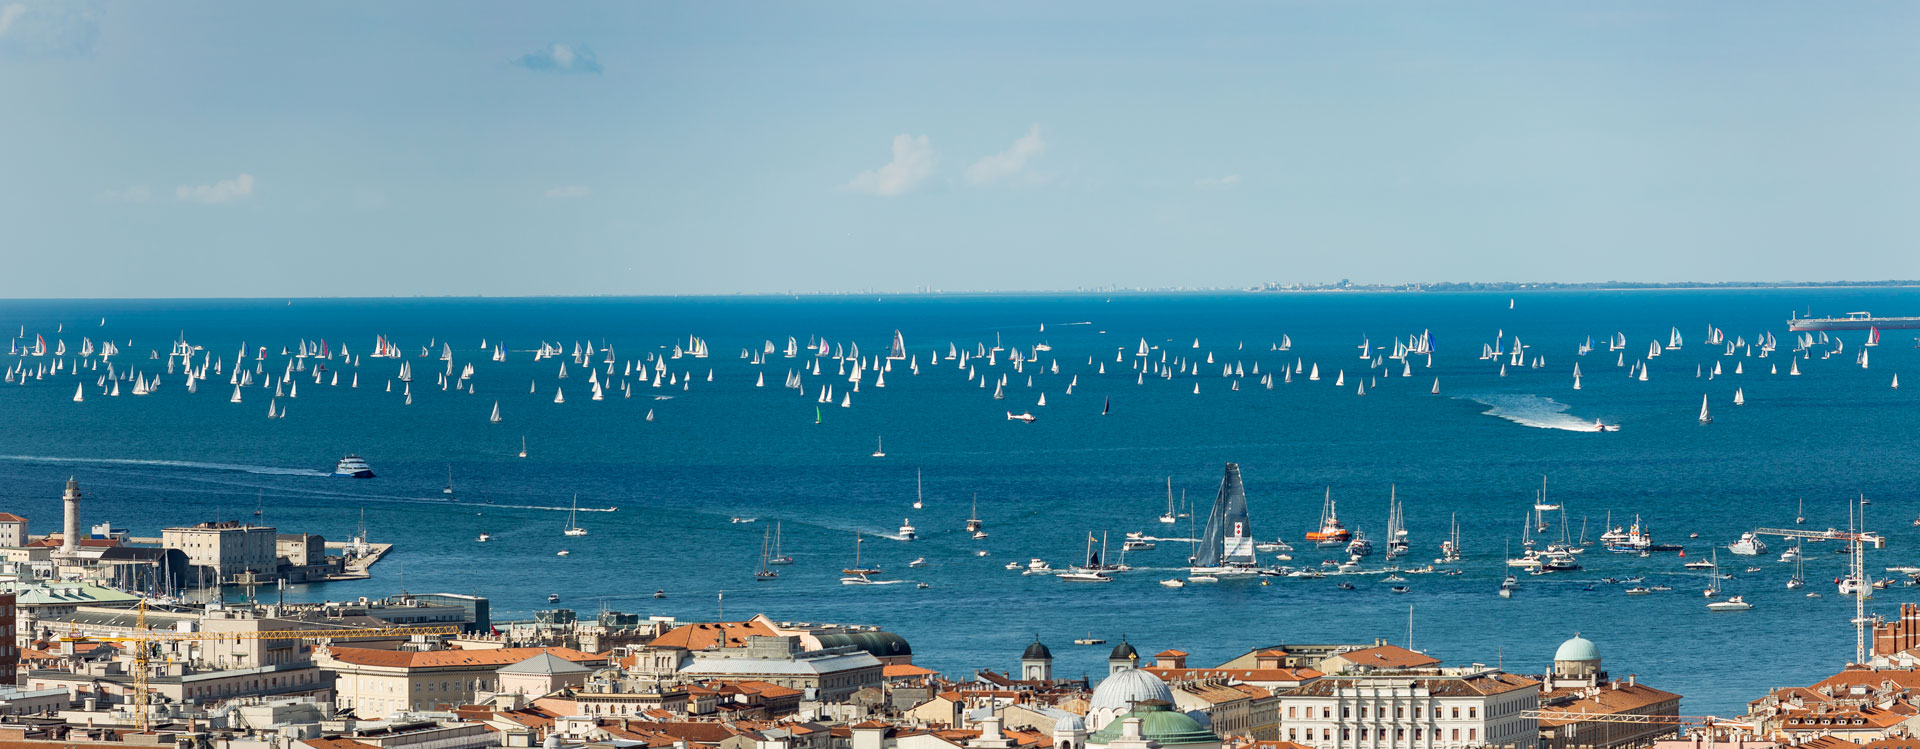 Boats in the sea in Trieste for the Barcolana event